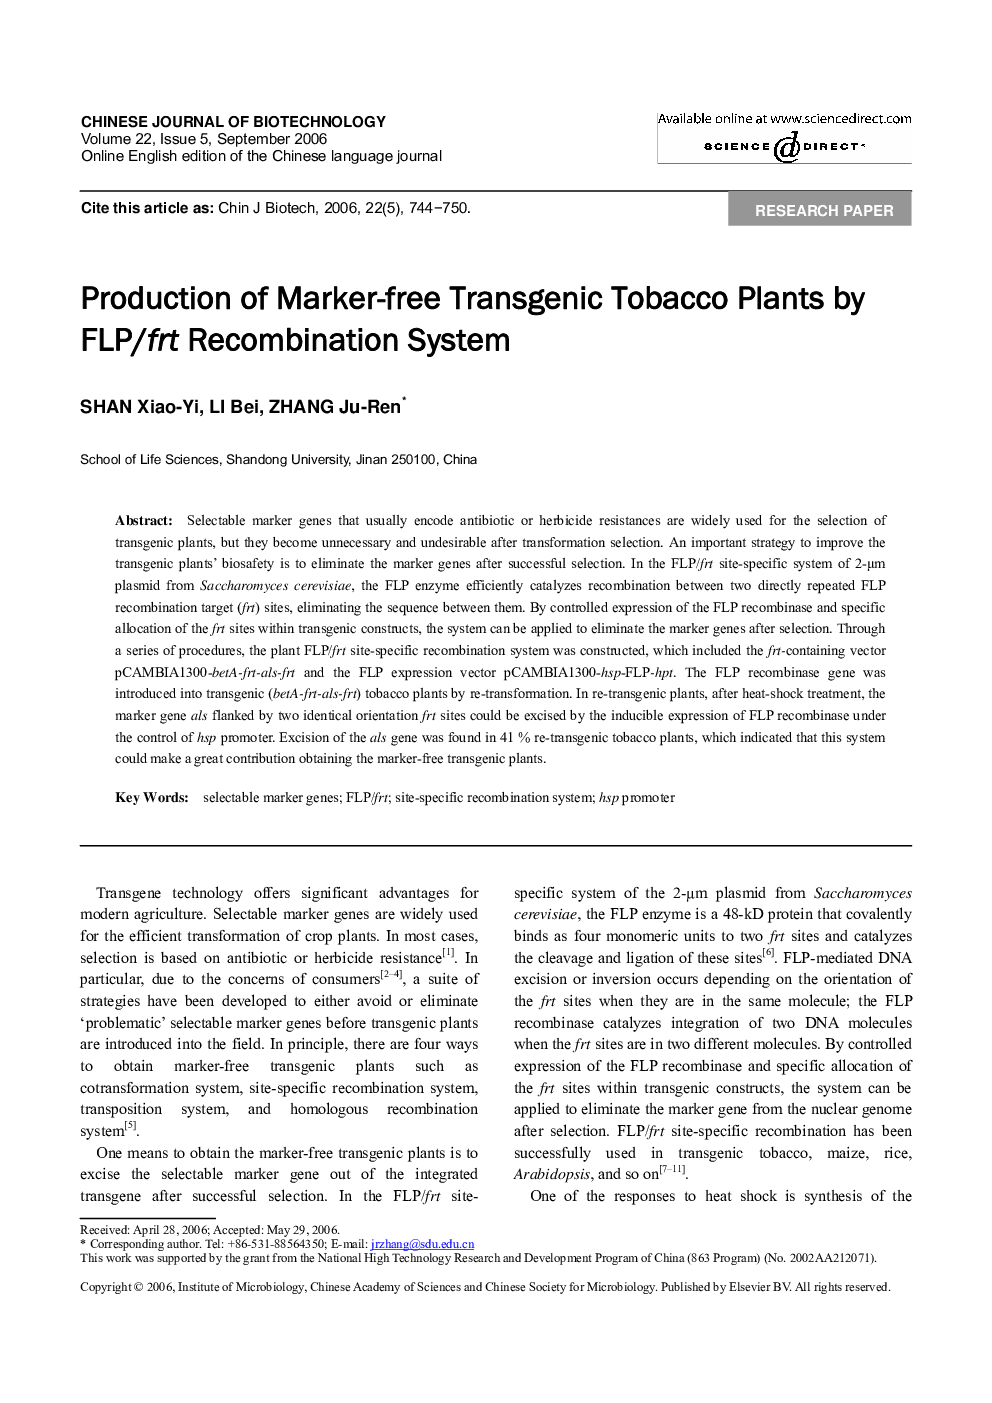 Production of Marker-free Transgenic Tobacco Plants by FLP/frt Recombination System